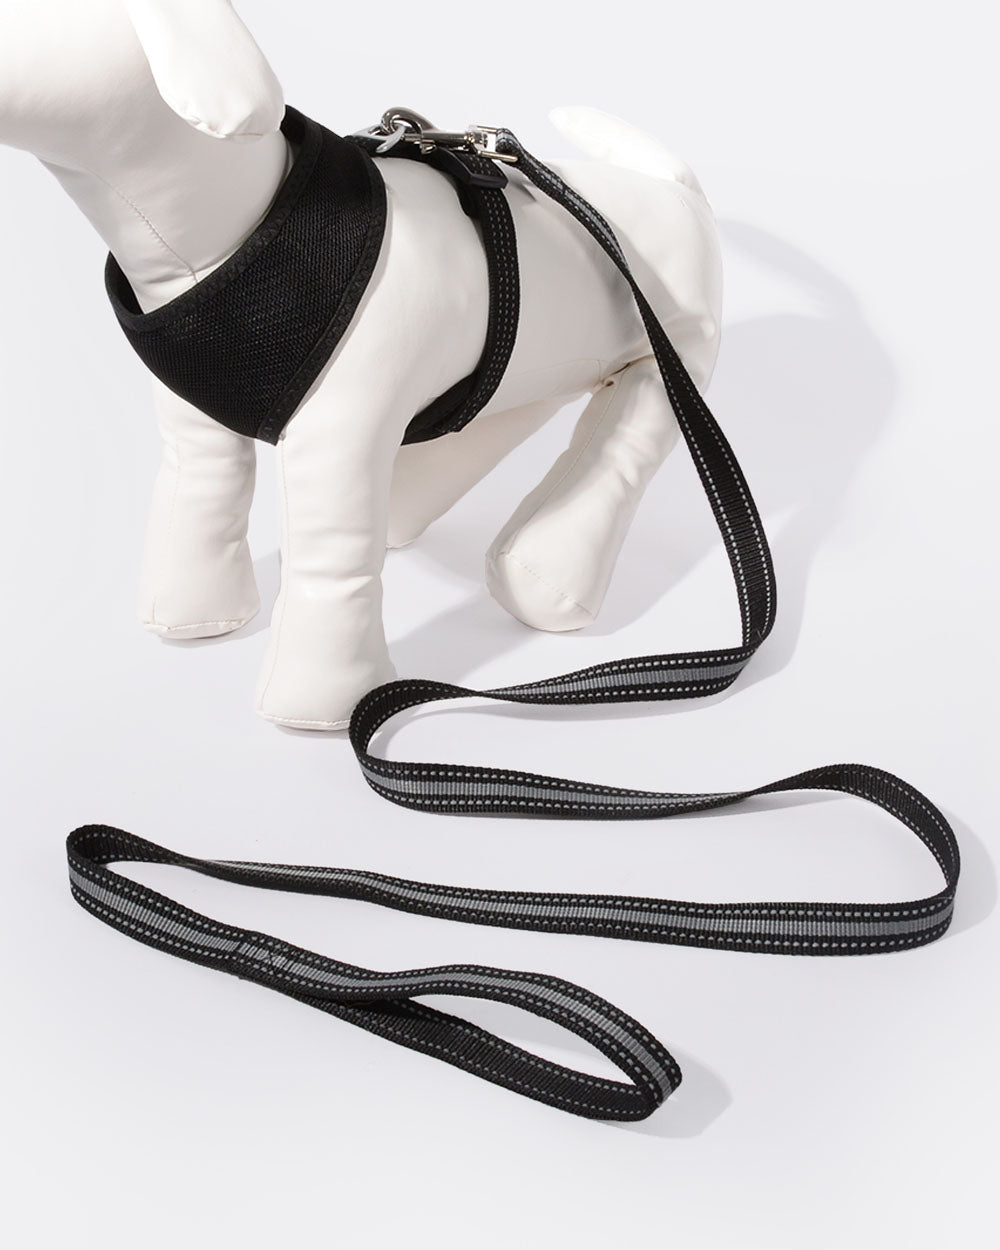 Simply Soft Harness and Leash Set - Classic Black